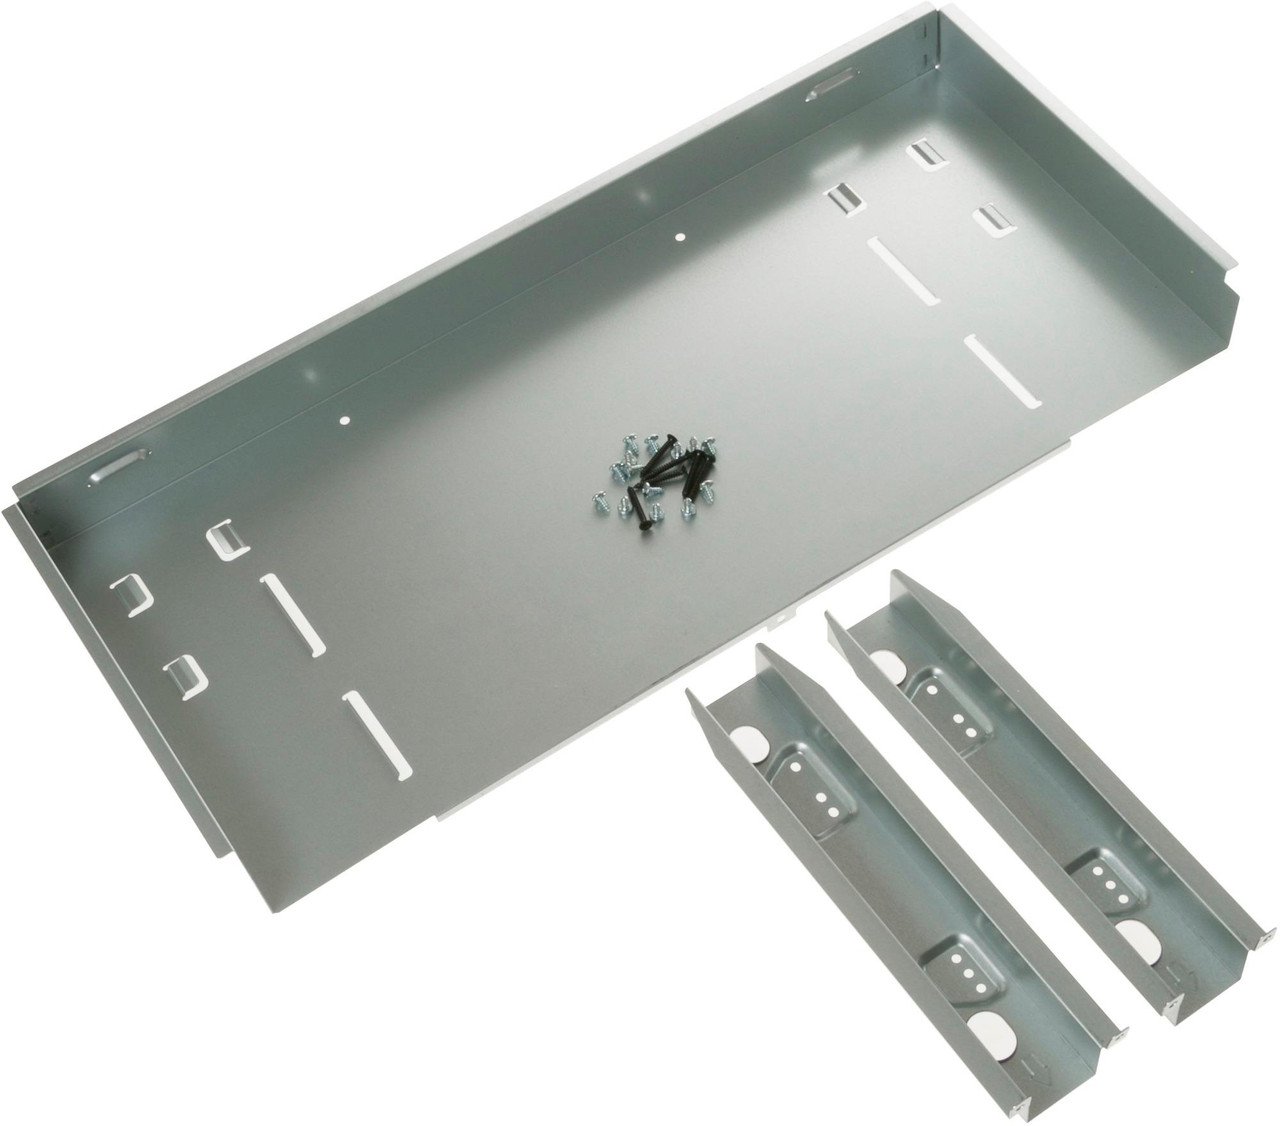 GE - 27" Built-In Trim Kit for Select GE Microwaves - Stainless steel